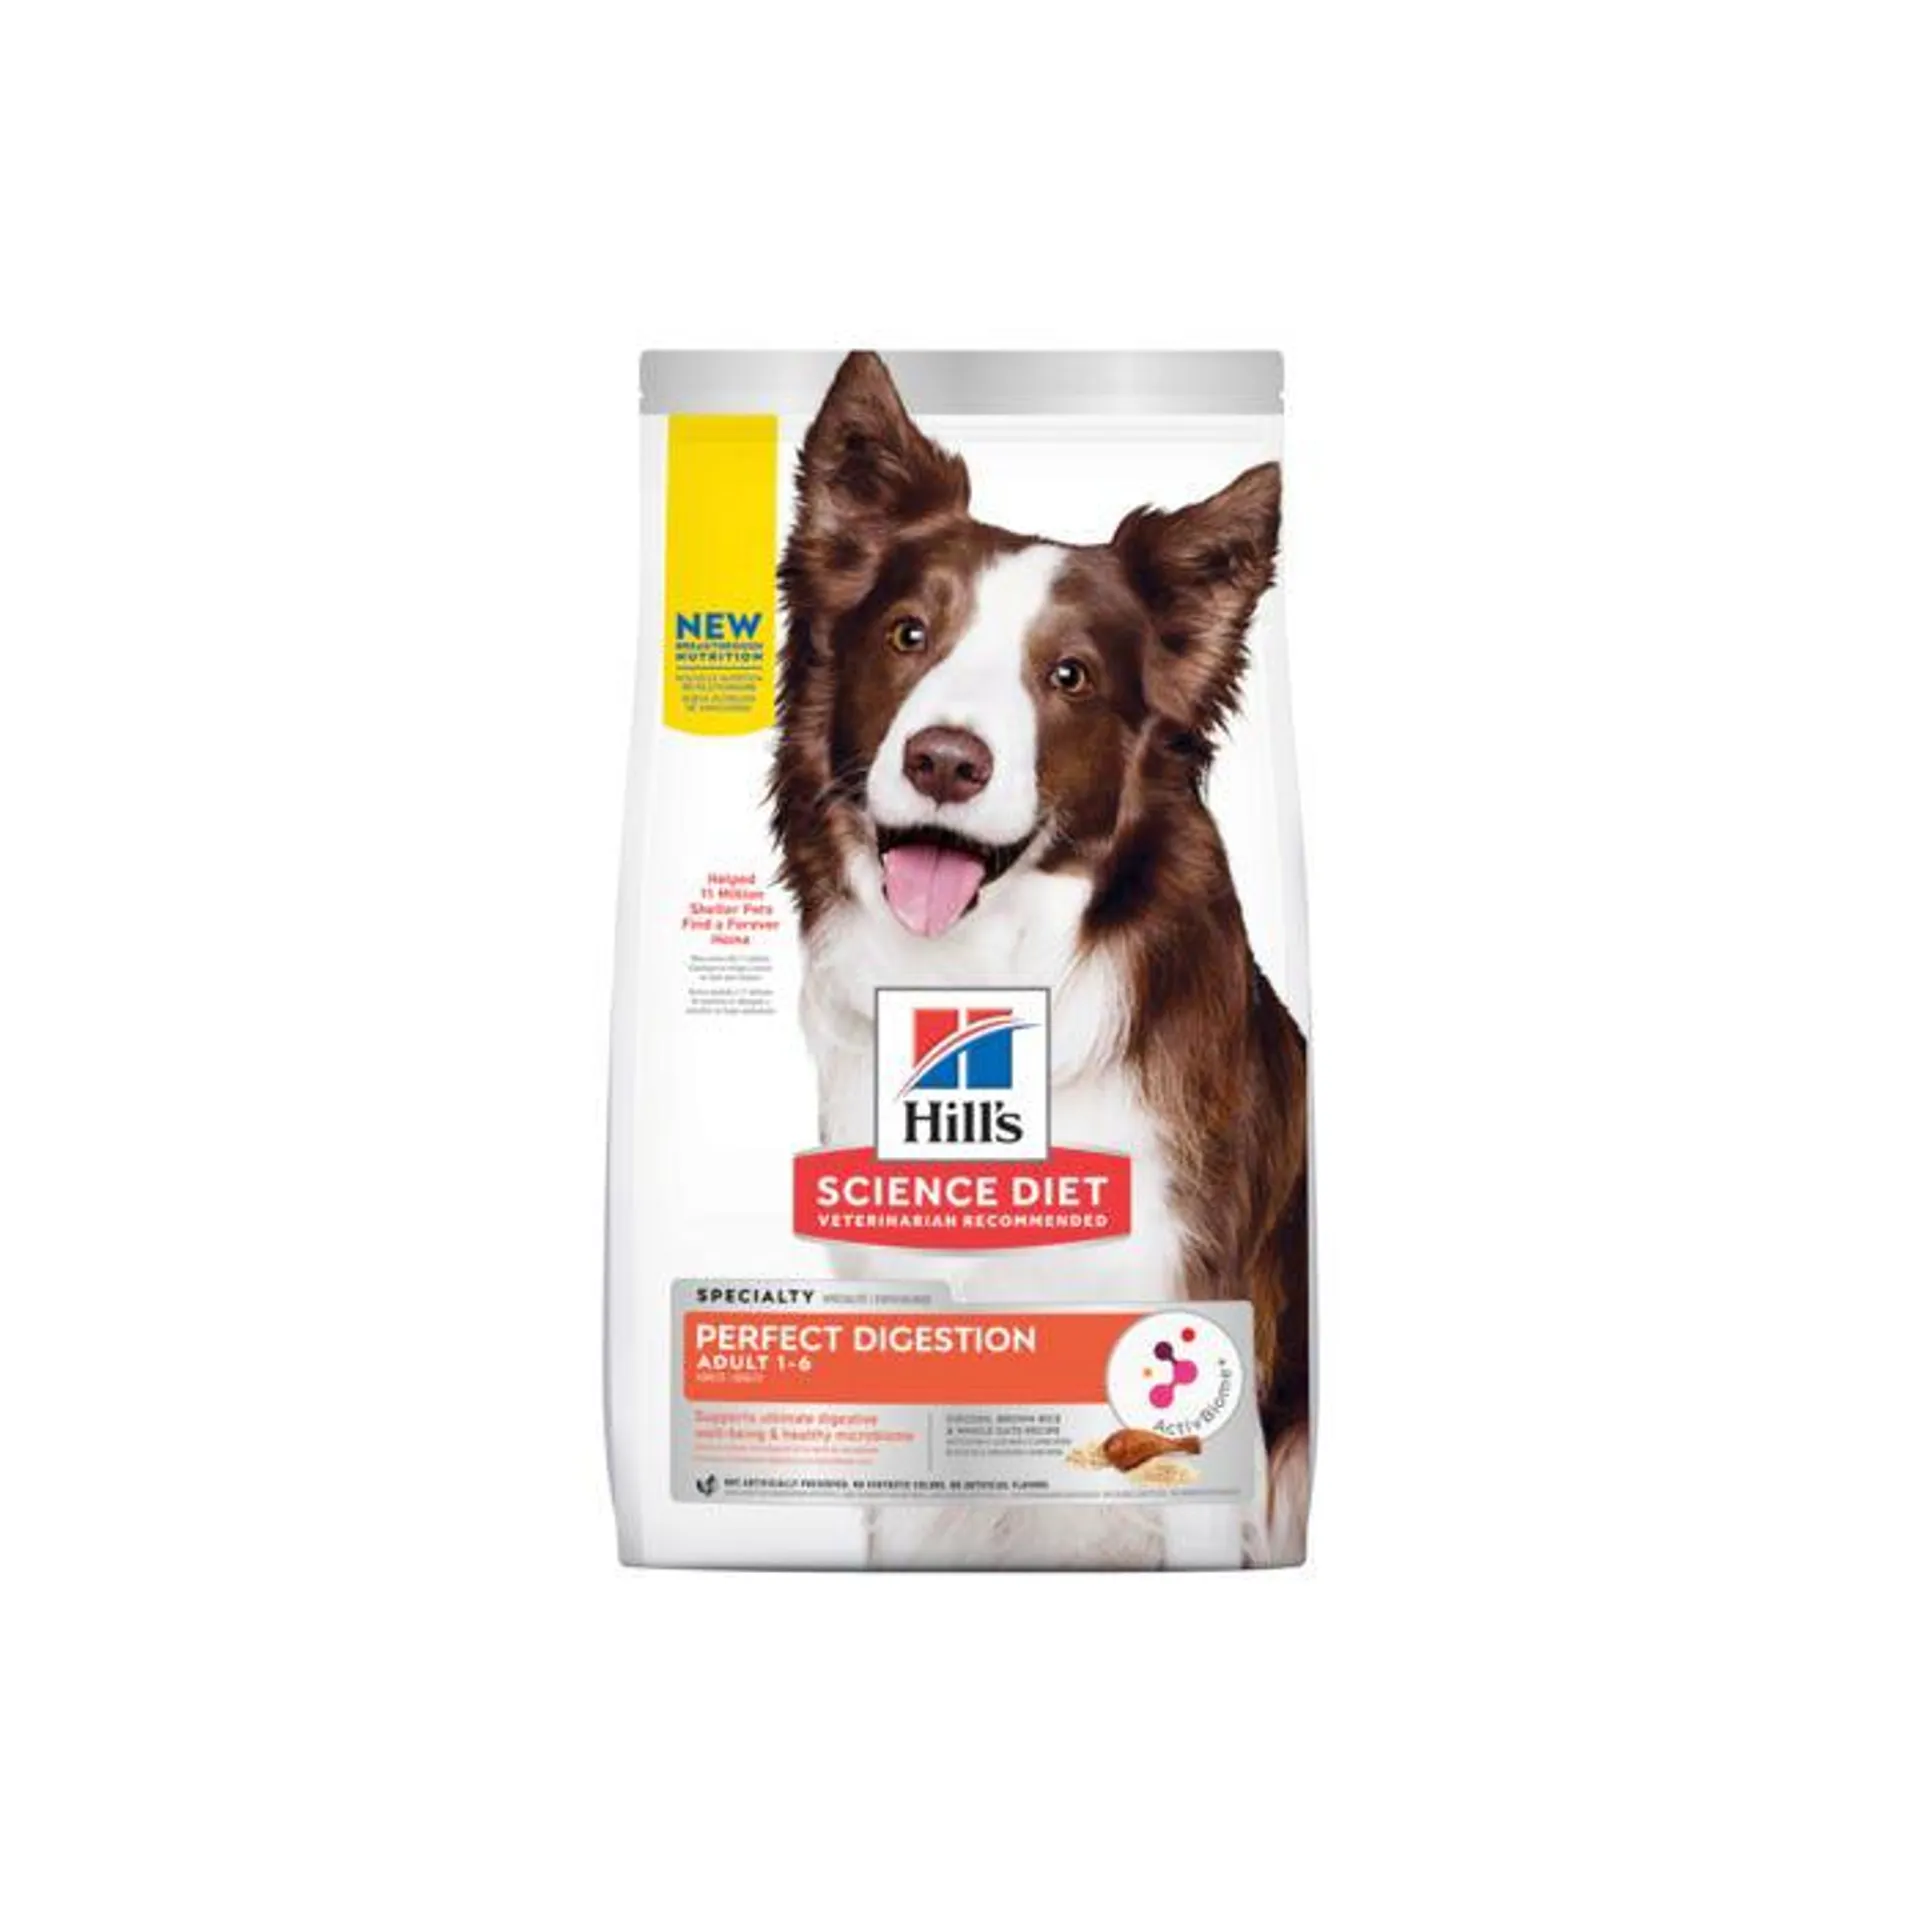 Hill's Science Diet Adult Perfect Digestion Dog Food 1.59kg